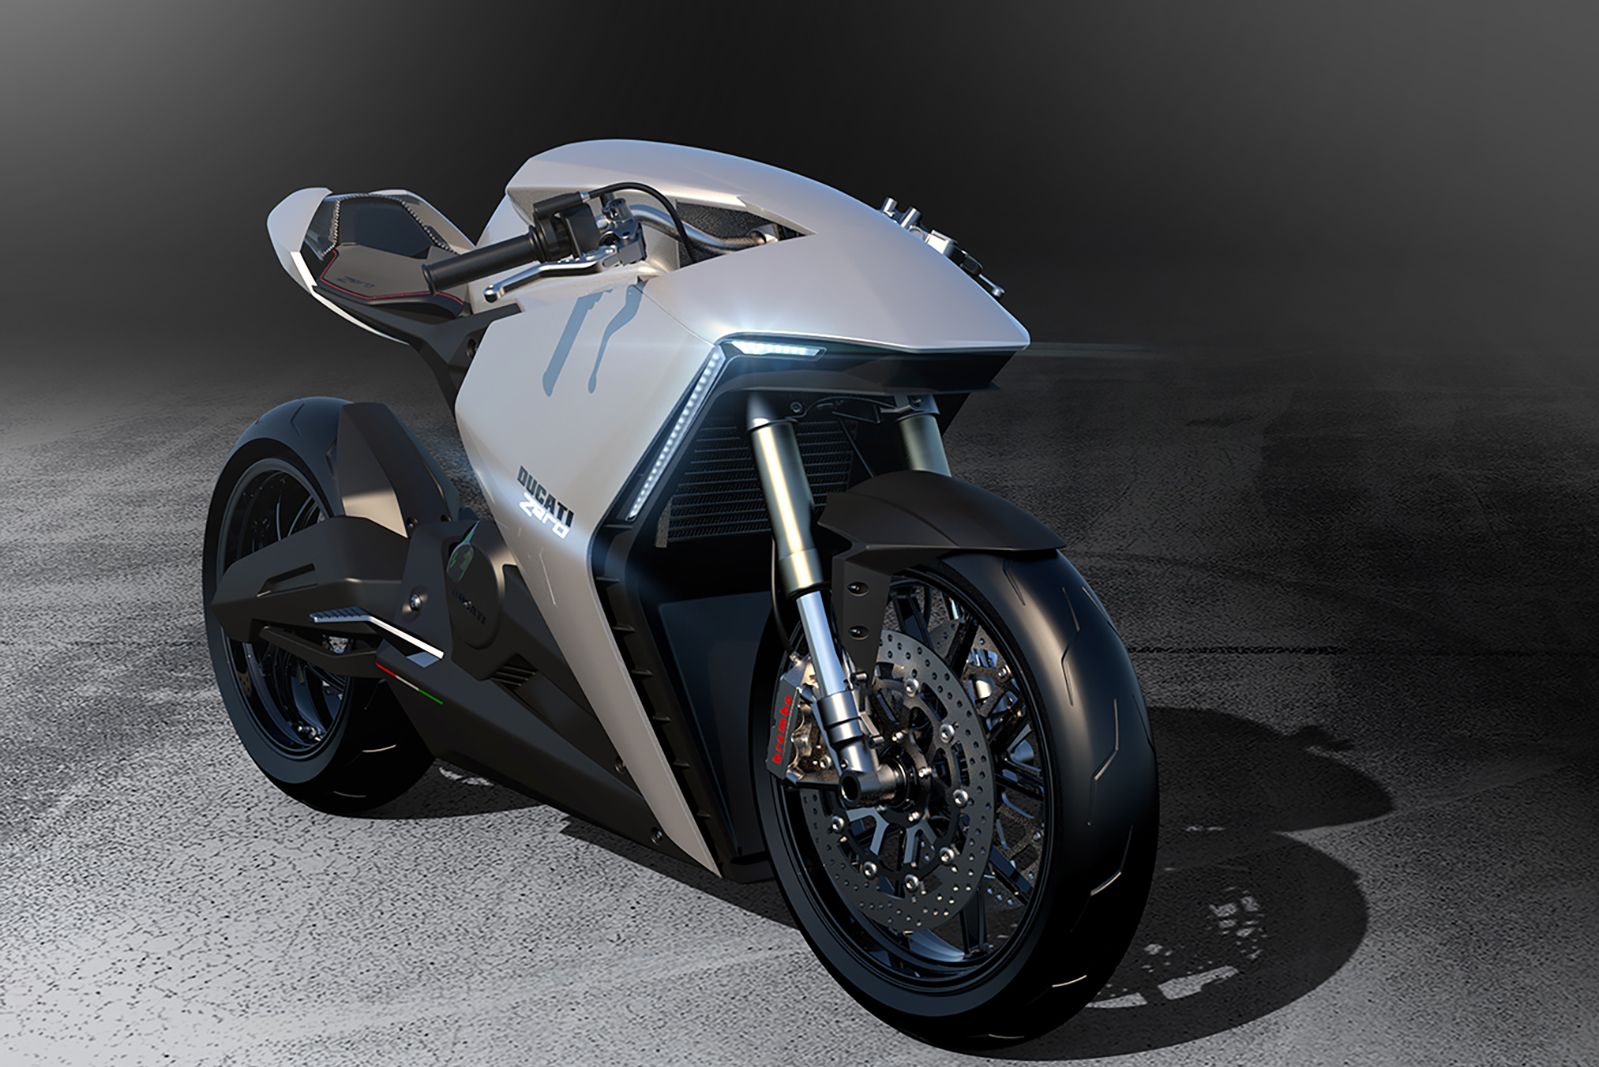 Ducati confirms plans for electric motorbike The future is electric image 1